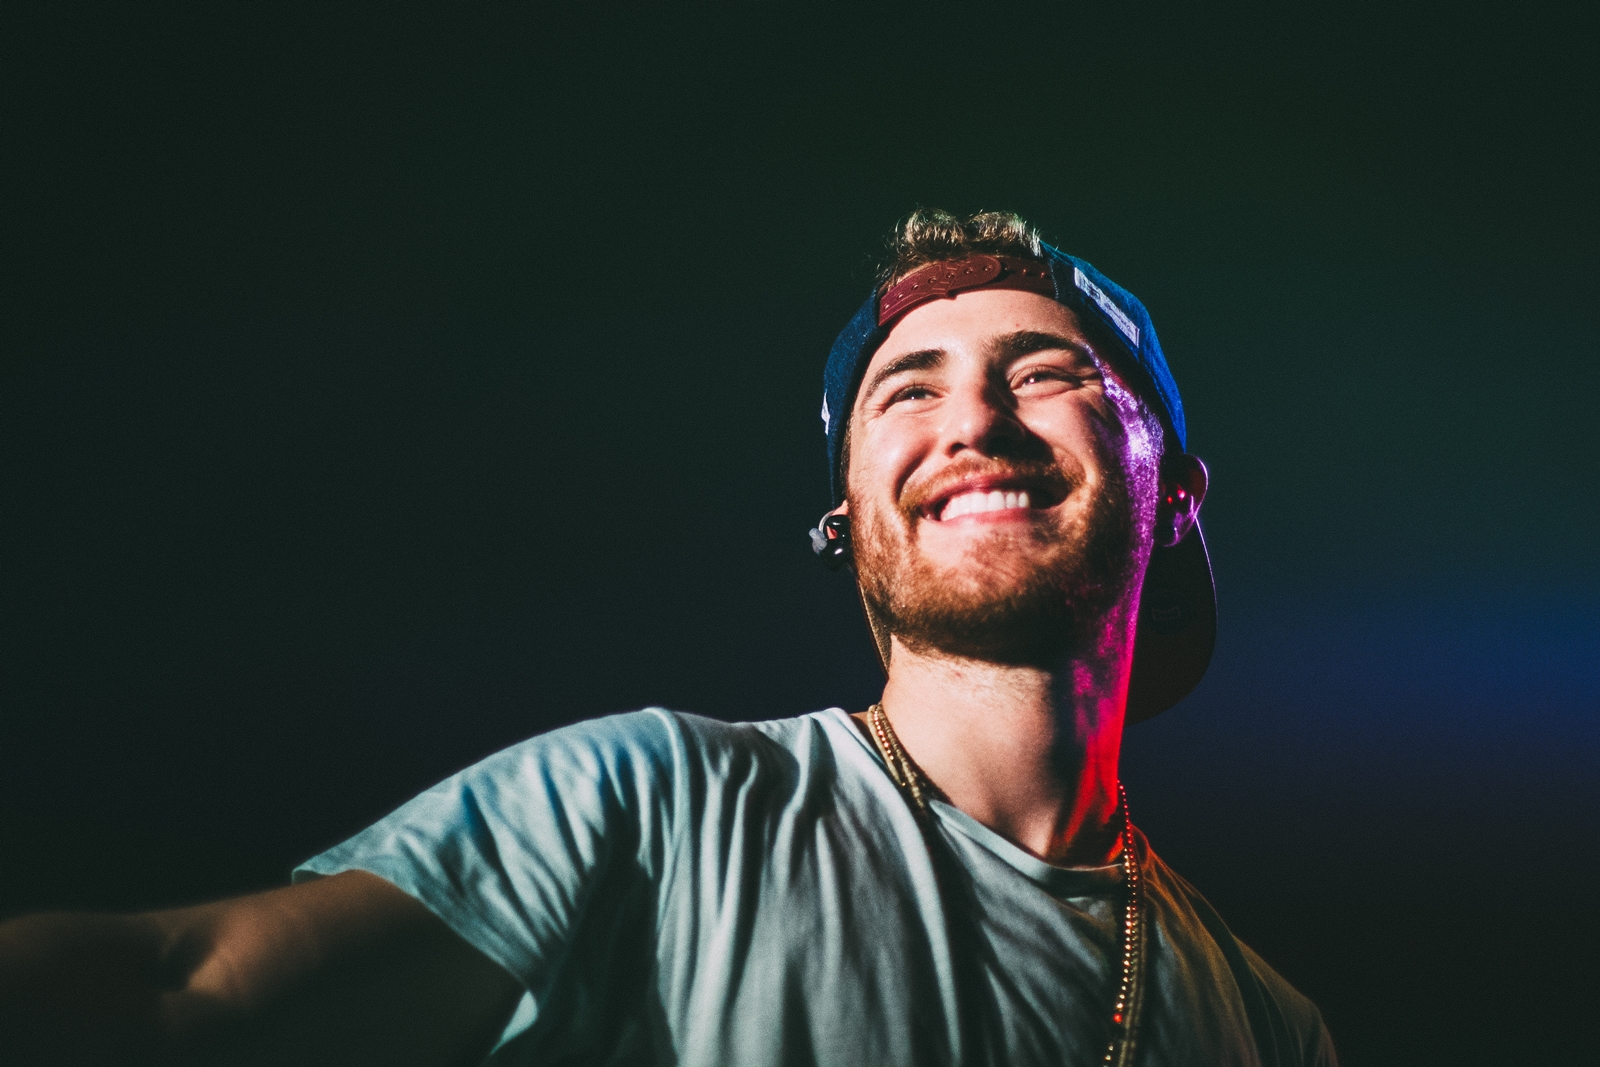 Mike Posner performaing at Albion College's Big Show 2014 in Albion, MI 4/21/14
Photo by Dave Lawrence
